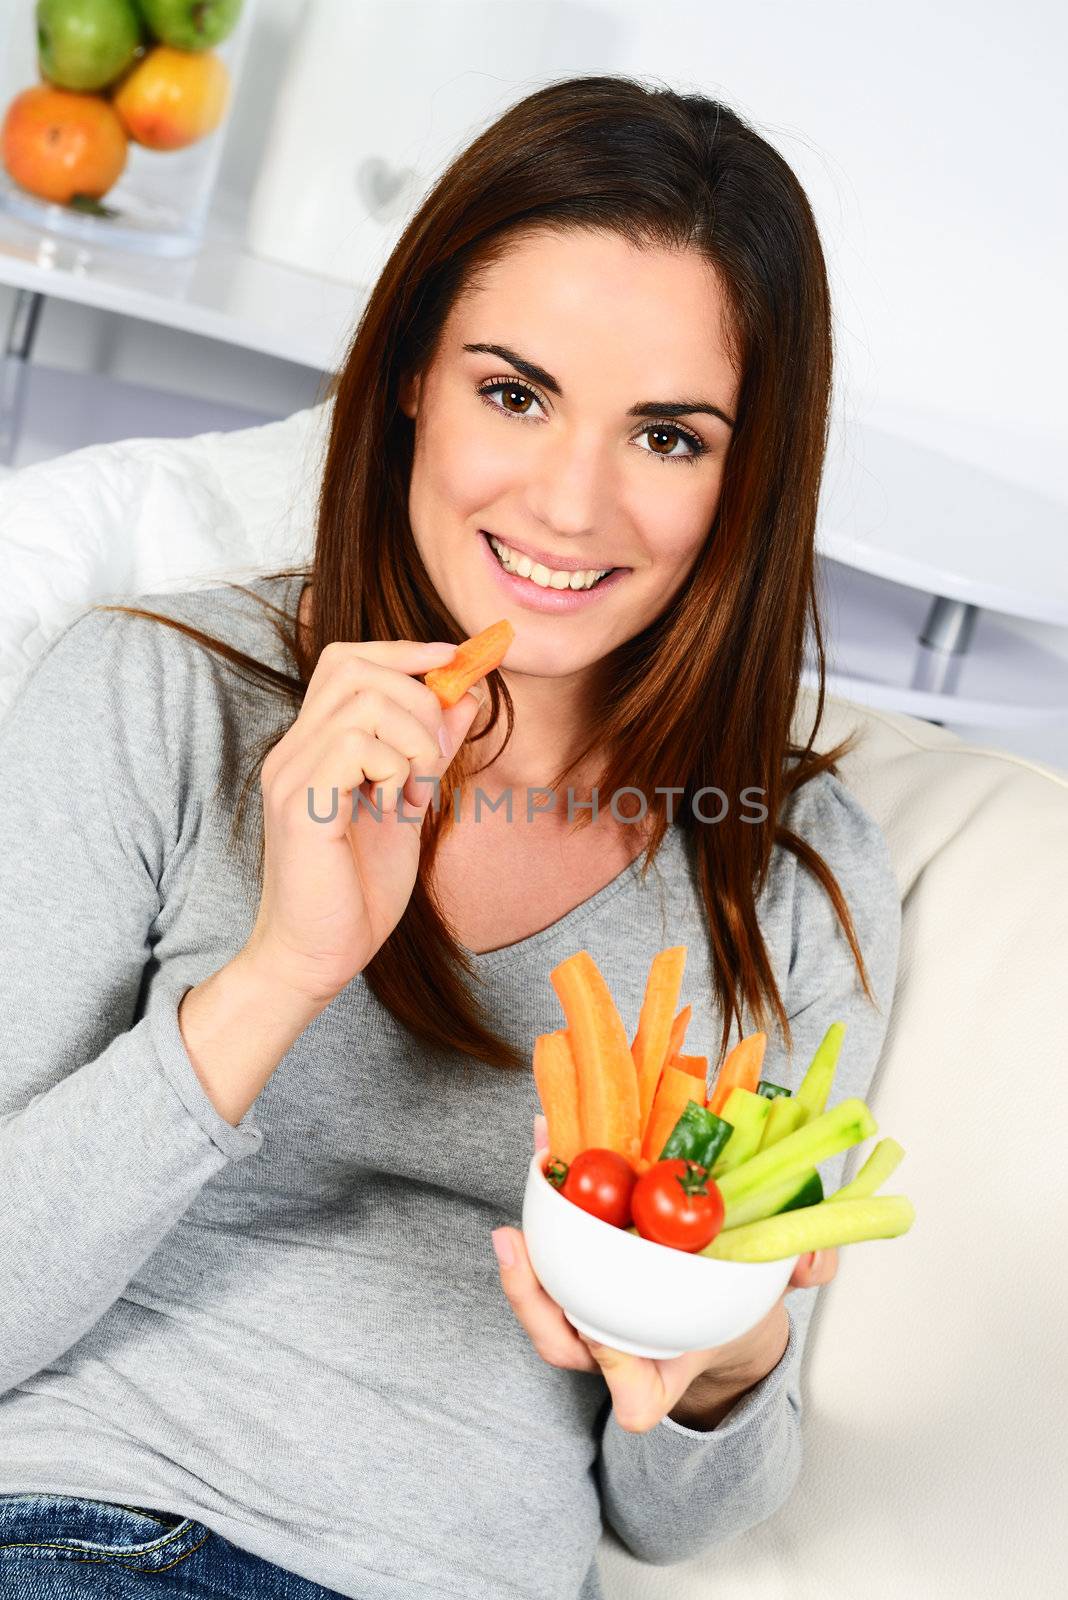 Woman eating salad. Beautiful healthy smiling Caucasian woman enjoying a fresh healthy salad sitting in sofa looking up. High angle view with copy space on modern interior. 